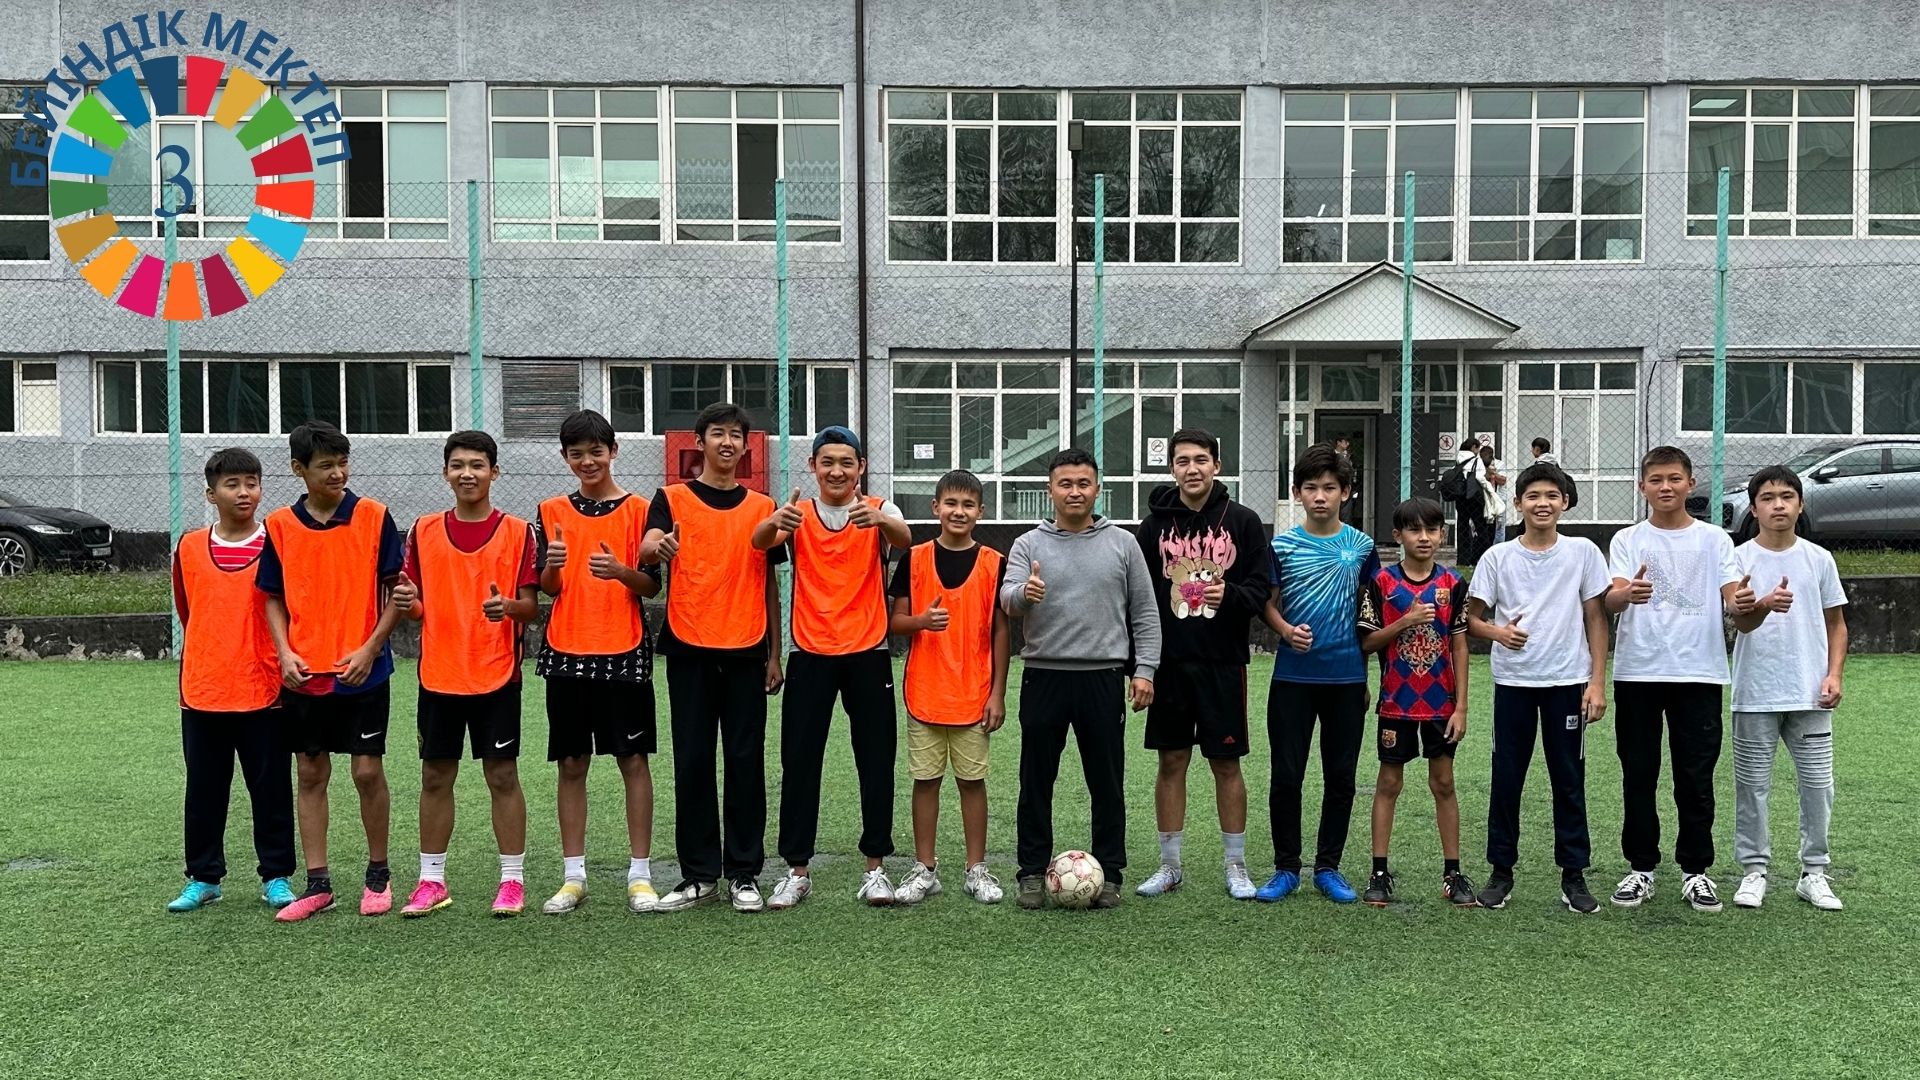 On September 29, football competitions among students were organized in the profile school of KazNU in honor of the upcoming teachers' holiday.